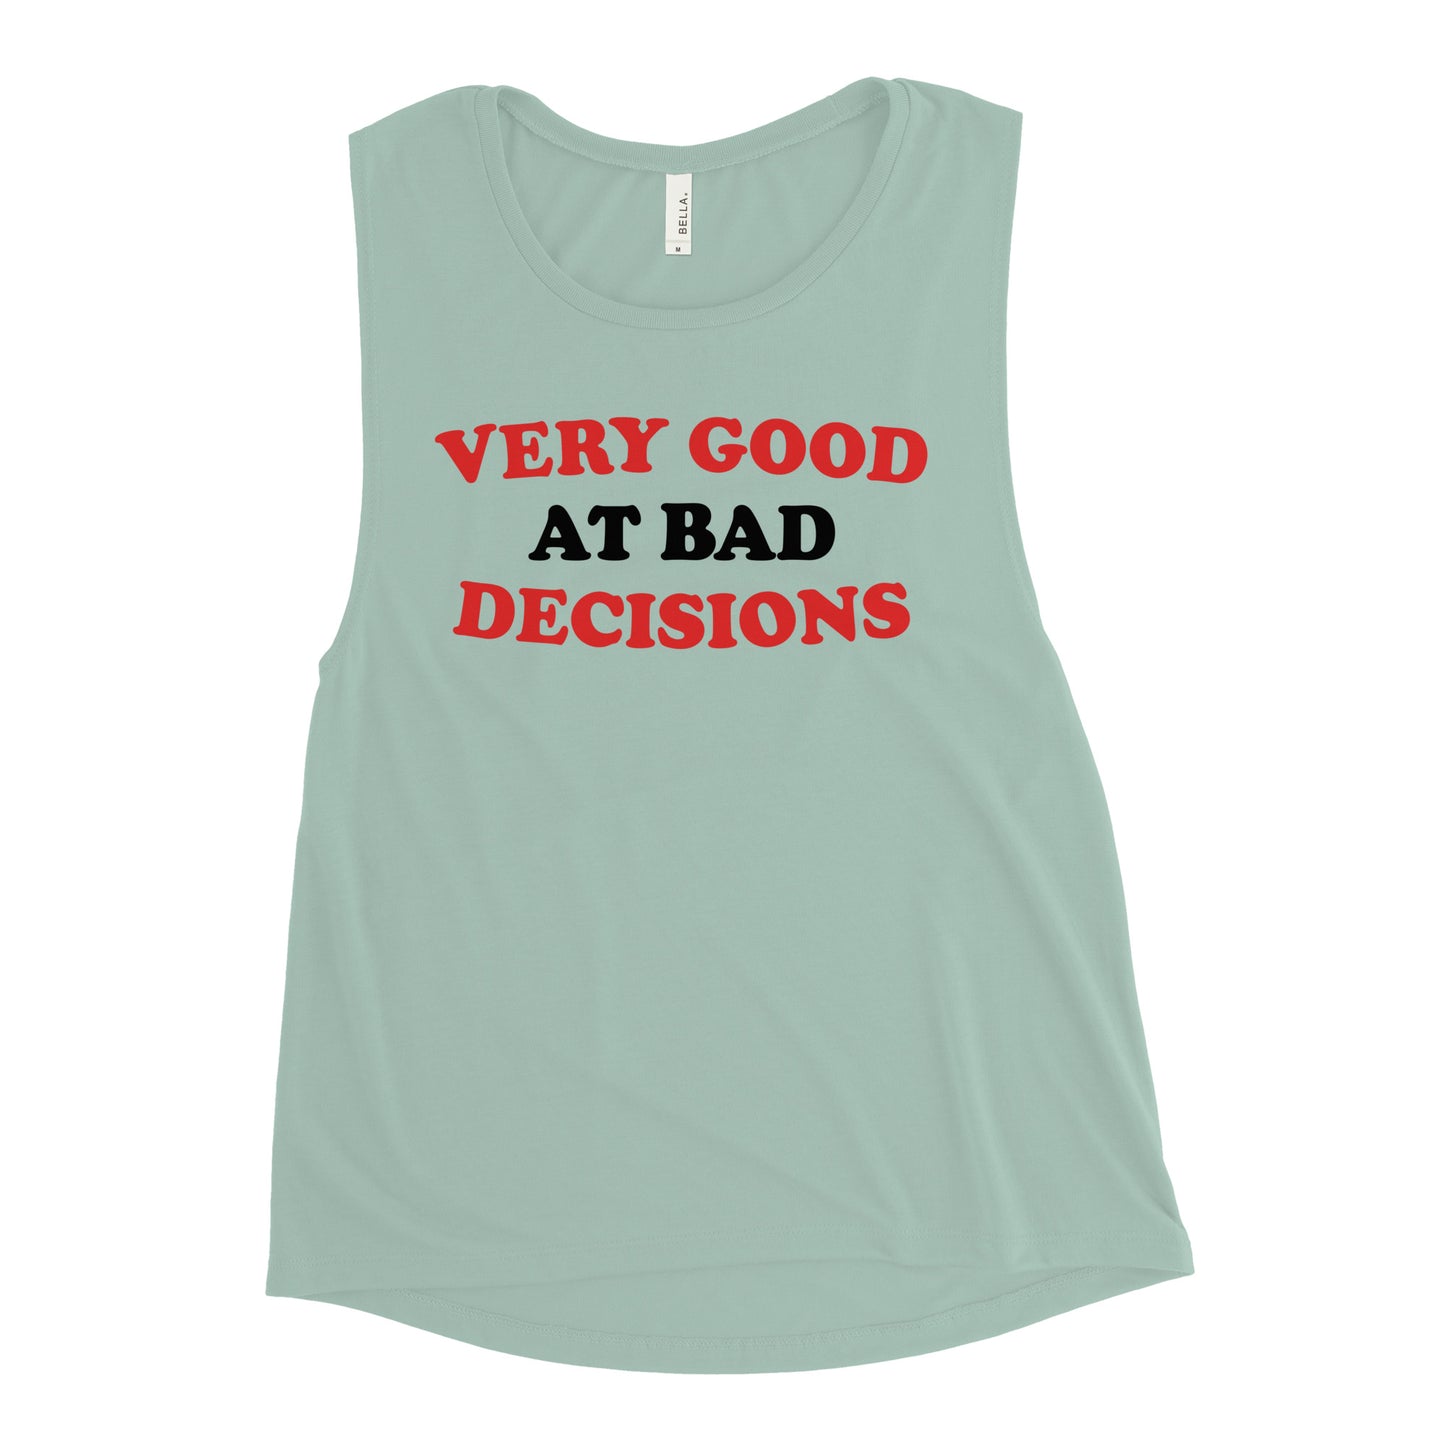 Very Good At Bad Decisions Women's Muscle Tank